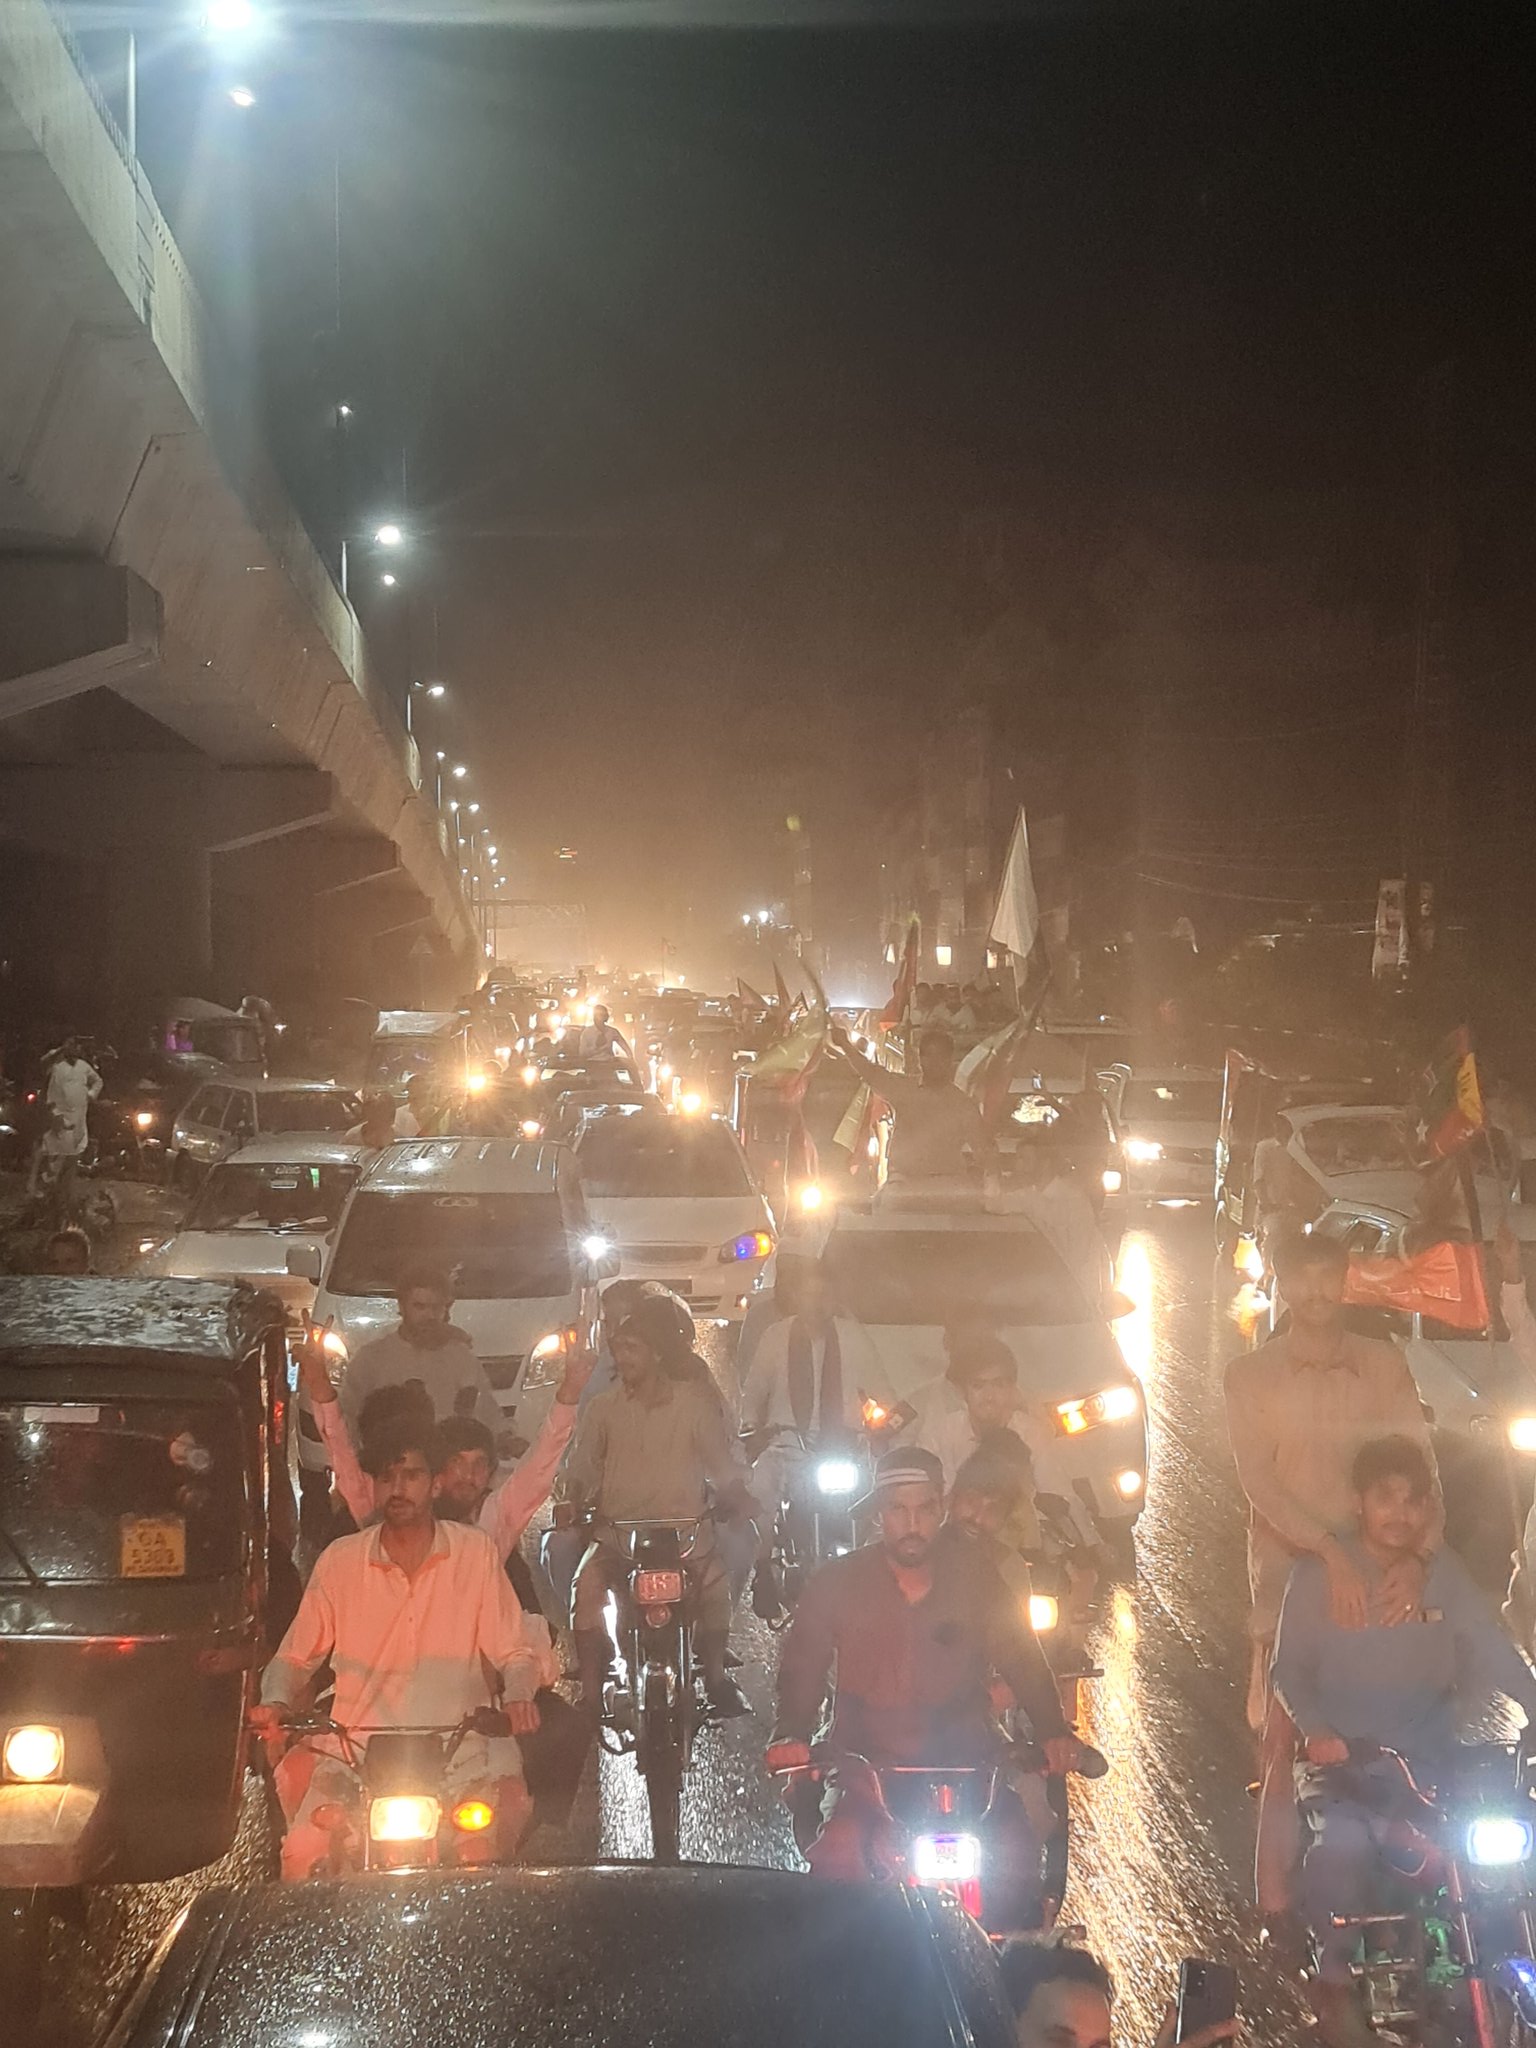 At the call of former Prime Minister Imran Khan, people took to the streets in different cities of the country.